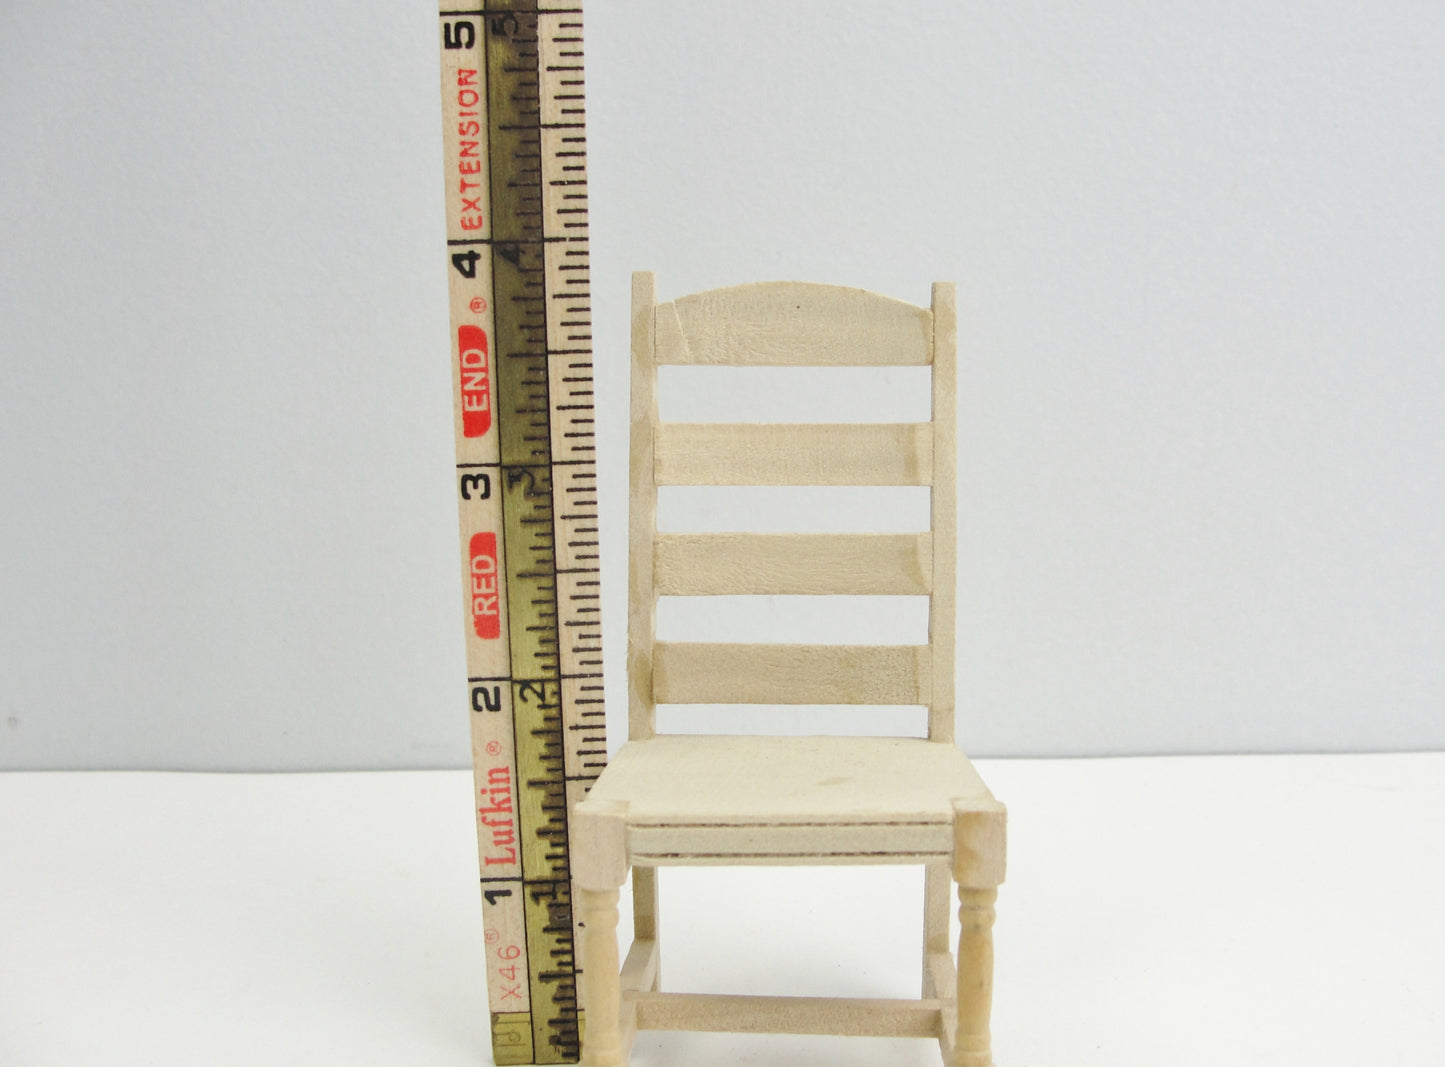 Dollhouse furniture ladder back dining chair